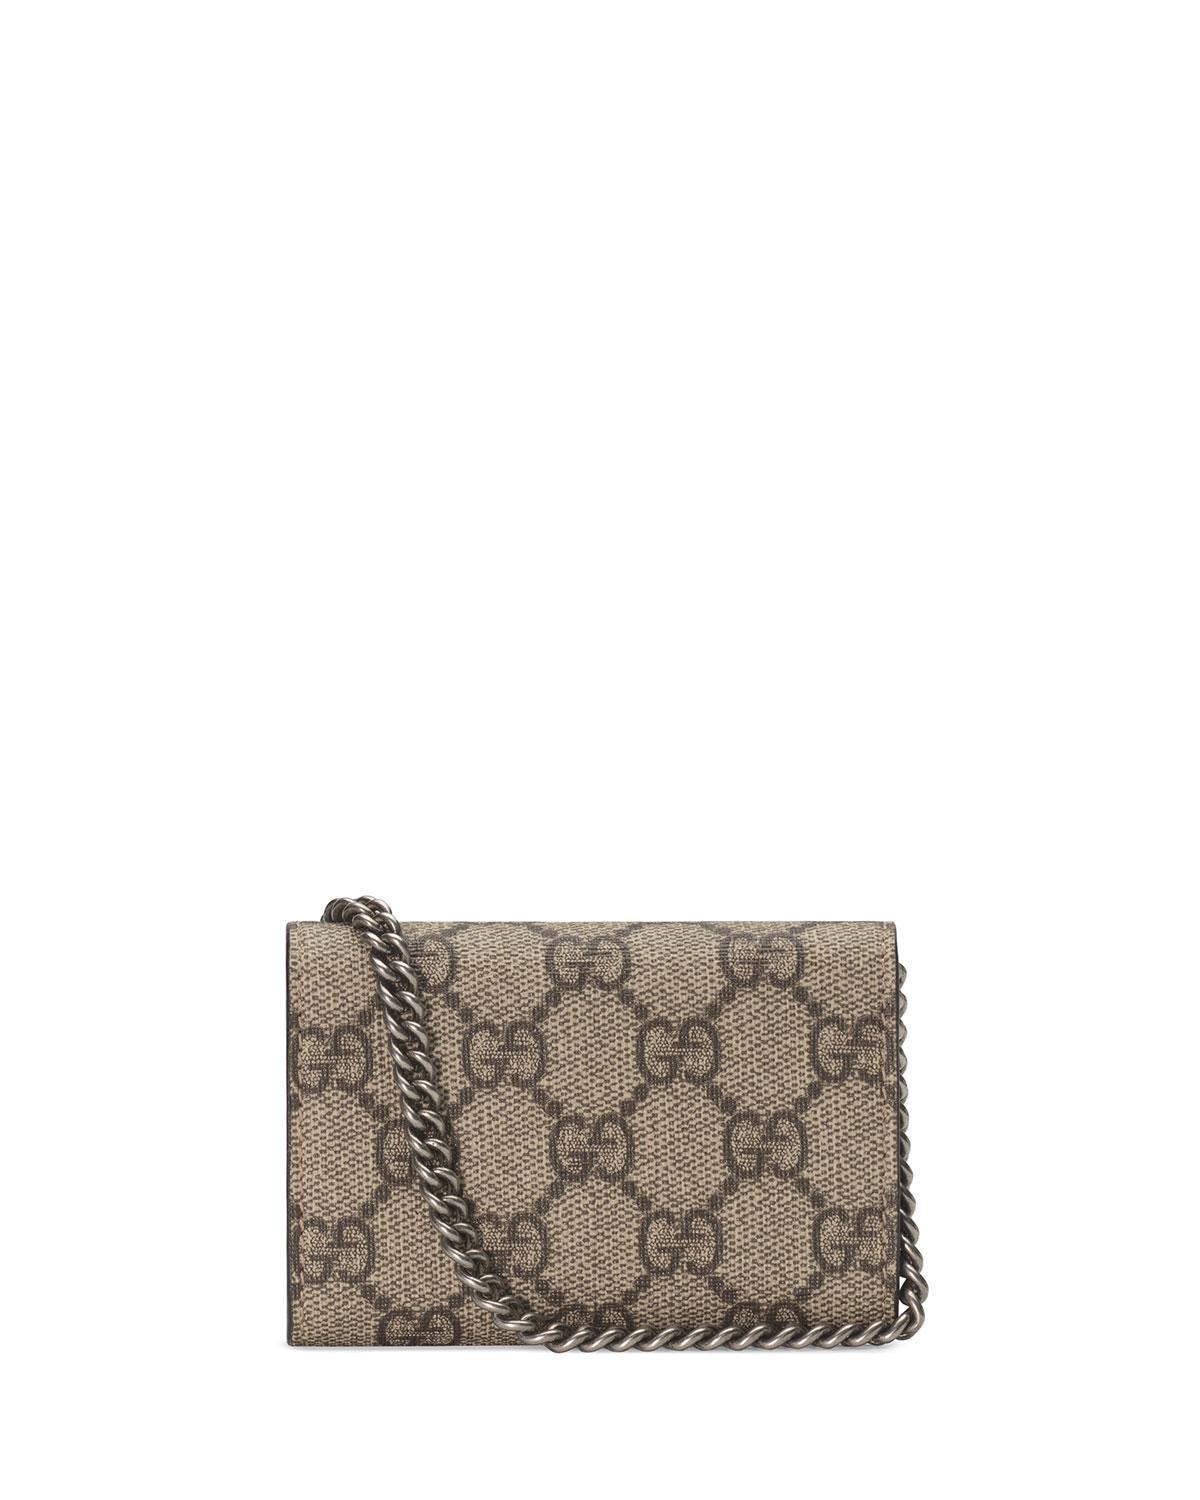 Gucci Dionysus GG Coin Purse in Natural - Lyst